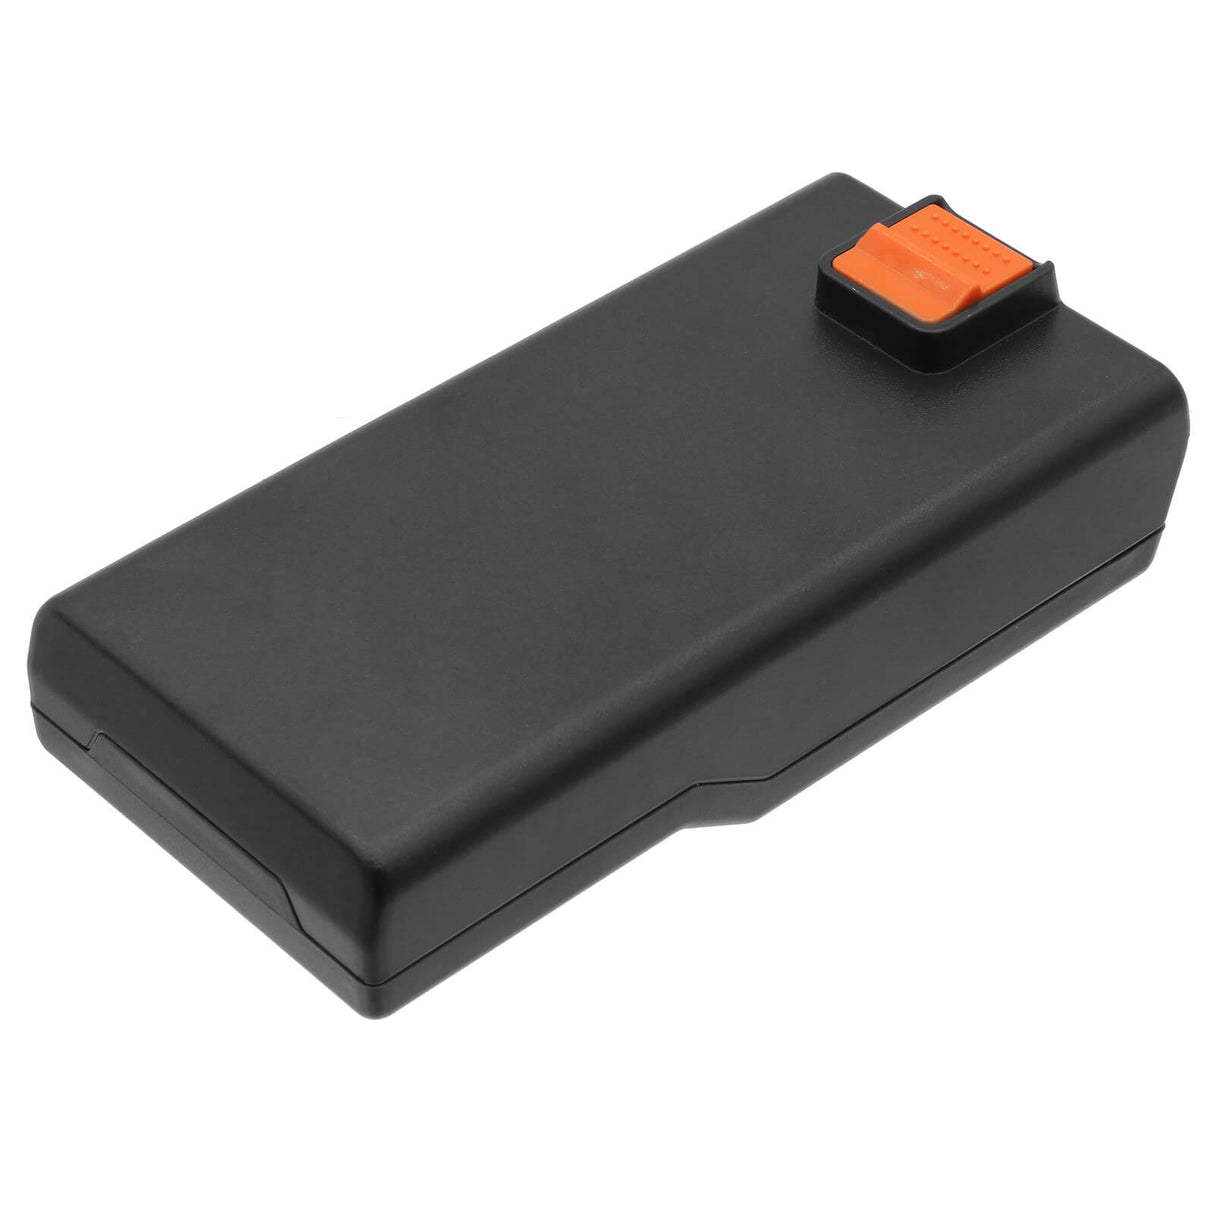 25.2v, Li-ion, 2000mah, Battery Fits Irobot, H1, H1 Handheld Vacuum Cleaner, 50.40wh Batteries for Electronics Cameron Sino Technology Limited   